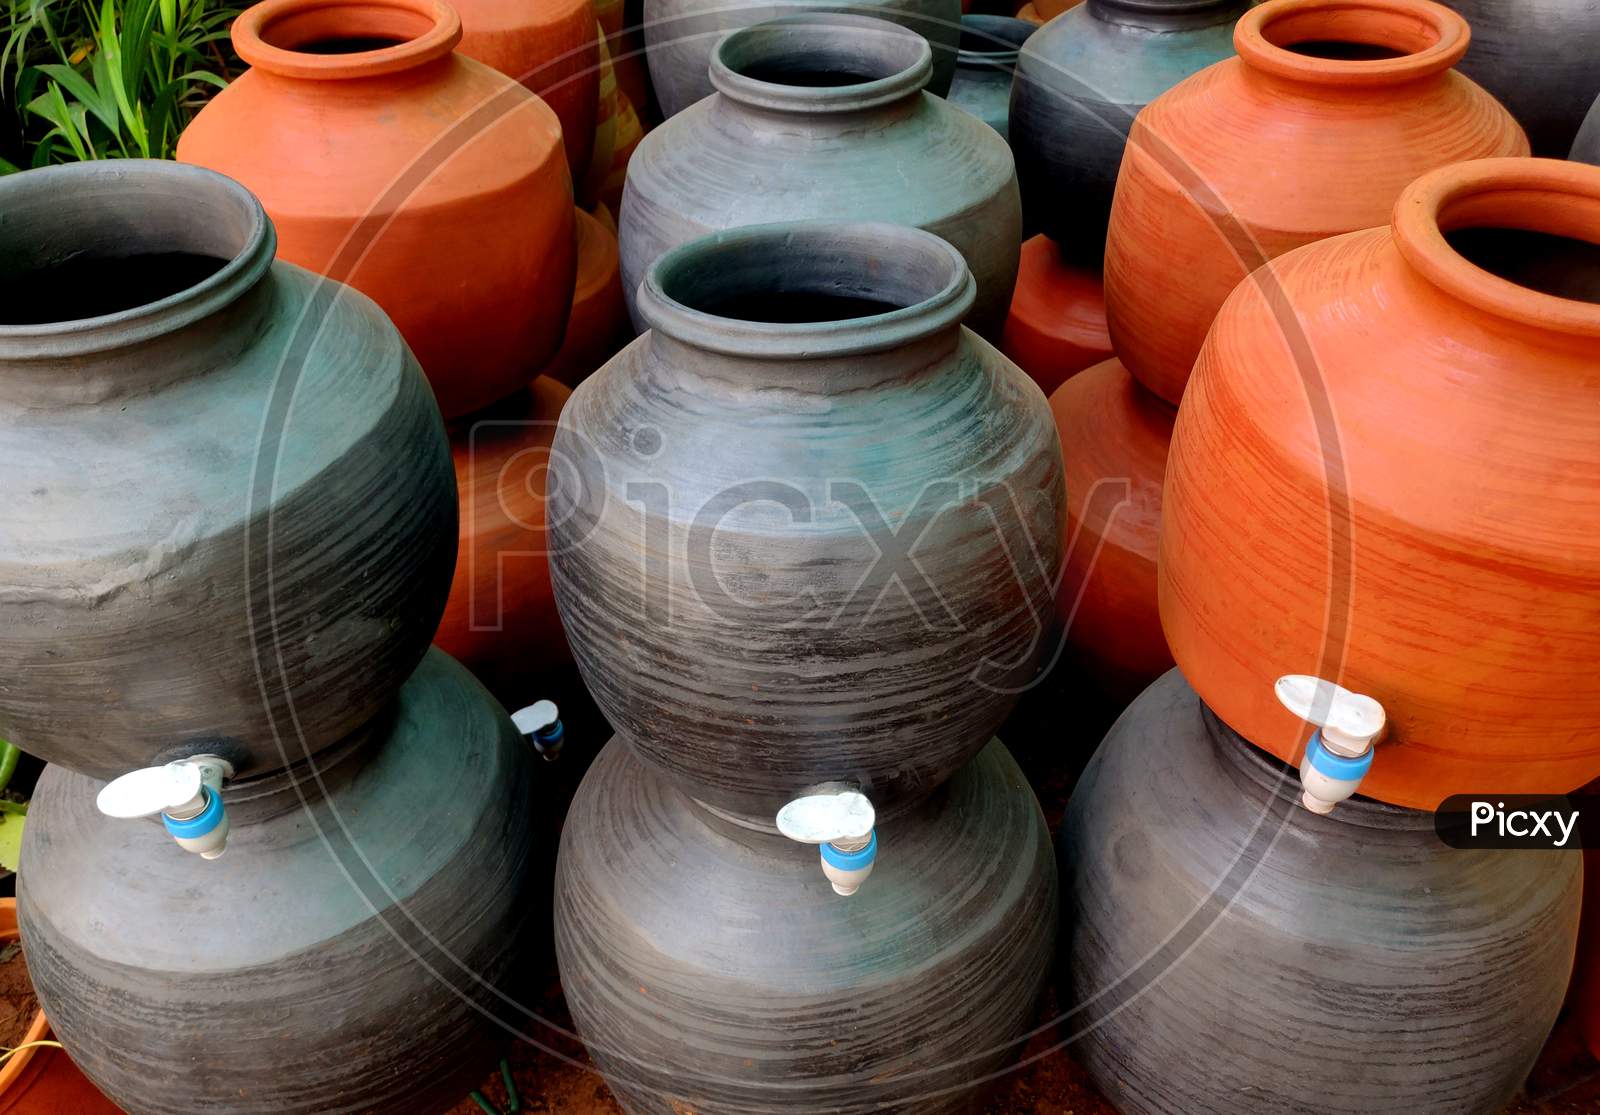 A Clay Water Pot Earthen Pot With Tap For Water Storage Clay Pots Not Only Cool The Water Down, They Also Provide Healing With The Elements Of Earth.